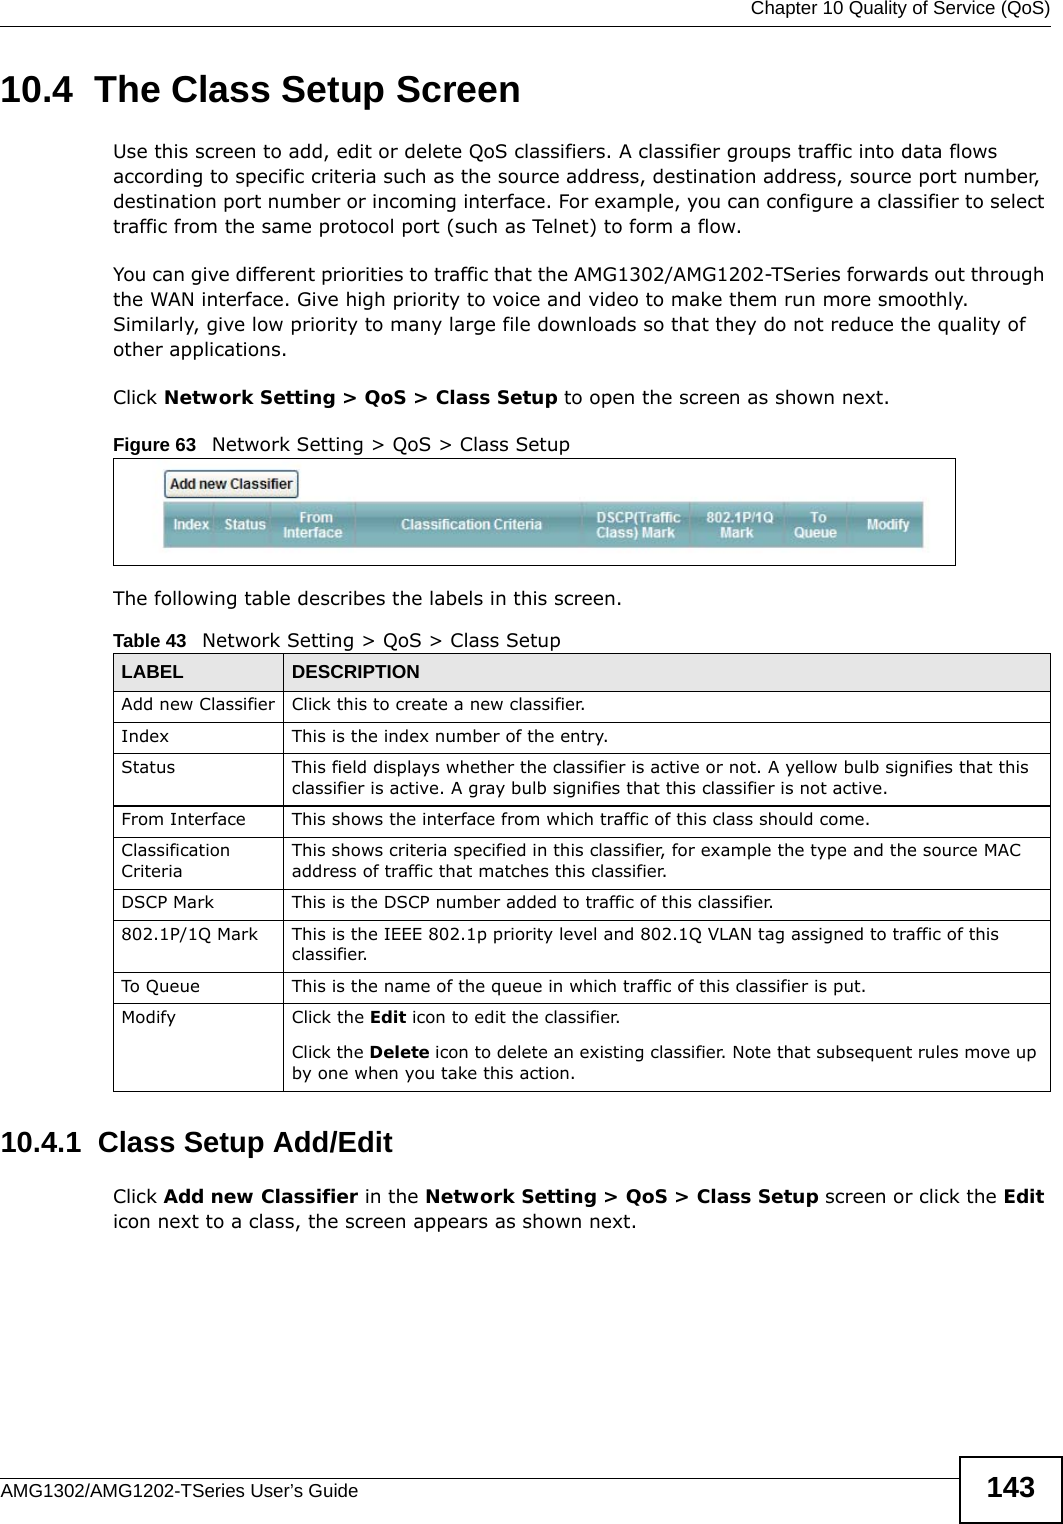  Chapter 10 Quality of Service (QoS)AMG1302/AMG1202-TSeries User’s Guide 14310.4  The Class Setup Screen Use this screen to add, edit or delete QoS classifiers. A classifier groups traffic into data flows according to specific criteria such as the source address, destination address, source port number, destination port number or incoming interface. For example, you can configure a classifier to select traffic from the same protocol port (such as Telnet) to form a flow.You can give different priorities to traffic that the AMG1302/AMG1202-TSeries forwards out through the WAN interface. Give high priority to voice and video to make them run more smoothly. Similarly, give low priority to many large file downloads so that they do not reduce the quality of other applications. Click Network Setting &gt; QoS &gt; Class Setup to open the screen as shown next.Figure 63   Network Setting &gt; QoS &gt; Class SetupThe following table describes the labels in this screen. 10.4.1  Class Setup Add/EditClick Add new Classifier in the Network Setting &gt; QoS &gt; Class Setup screen or click the Edit icon next to a class, the screen appears as shown next.Table 43   Network Setting &gt; QoS &gt; Class SetupLABEL DESCRIPTIONAdd new Classifier Click this to create a new classifier.Index This is the index number of the entry.Status This field displays whether the classifier is active or not. A yellow bulb signifies that this classifier is active. A gray bulb signifies that this classifier is not active.From Interface This shows the interface from which traffic of this class should come.Classification CriteriaThis shows criteria specified in this classifier, for example the type and the source MAC address of traffic that matches this classifier.DSCP Mark This is the DSCP number added to traffic of this classifier.802.1P/1Q Mark This is the IEEE 802.1p priority level and 802.1Q VLAN tag assigned to traffic of this classifier.To Queue This is the name of the queue in which traffic of this classifier is put.Modify Click the Edit icon to edit the classifier.Click the Delete icon to delete an existing classifier. Note that subsequent rules move up by one when you take this action.